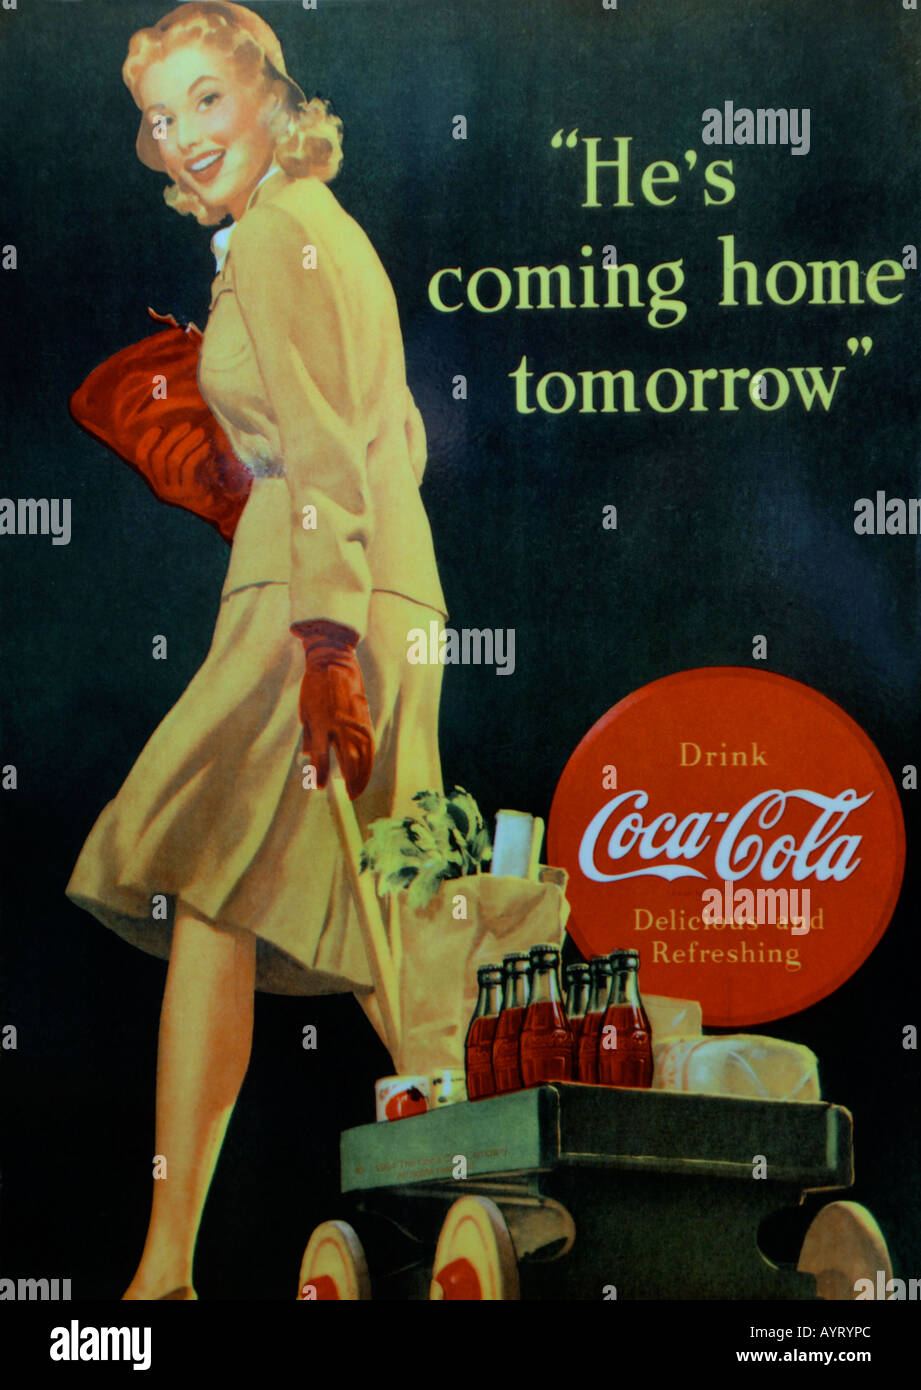 Old fashioned coca cola advert poster Banque D'Images